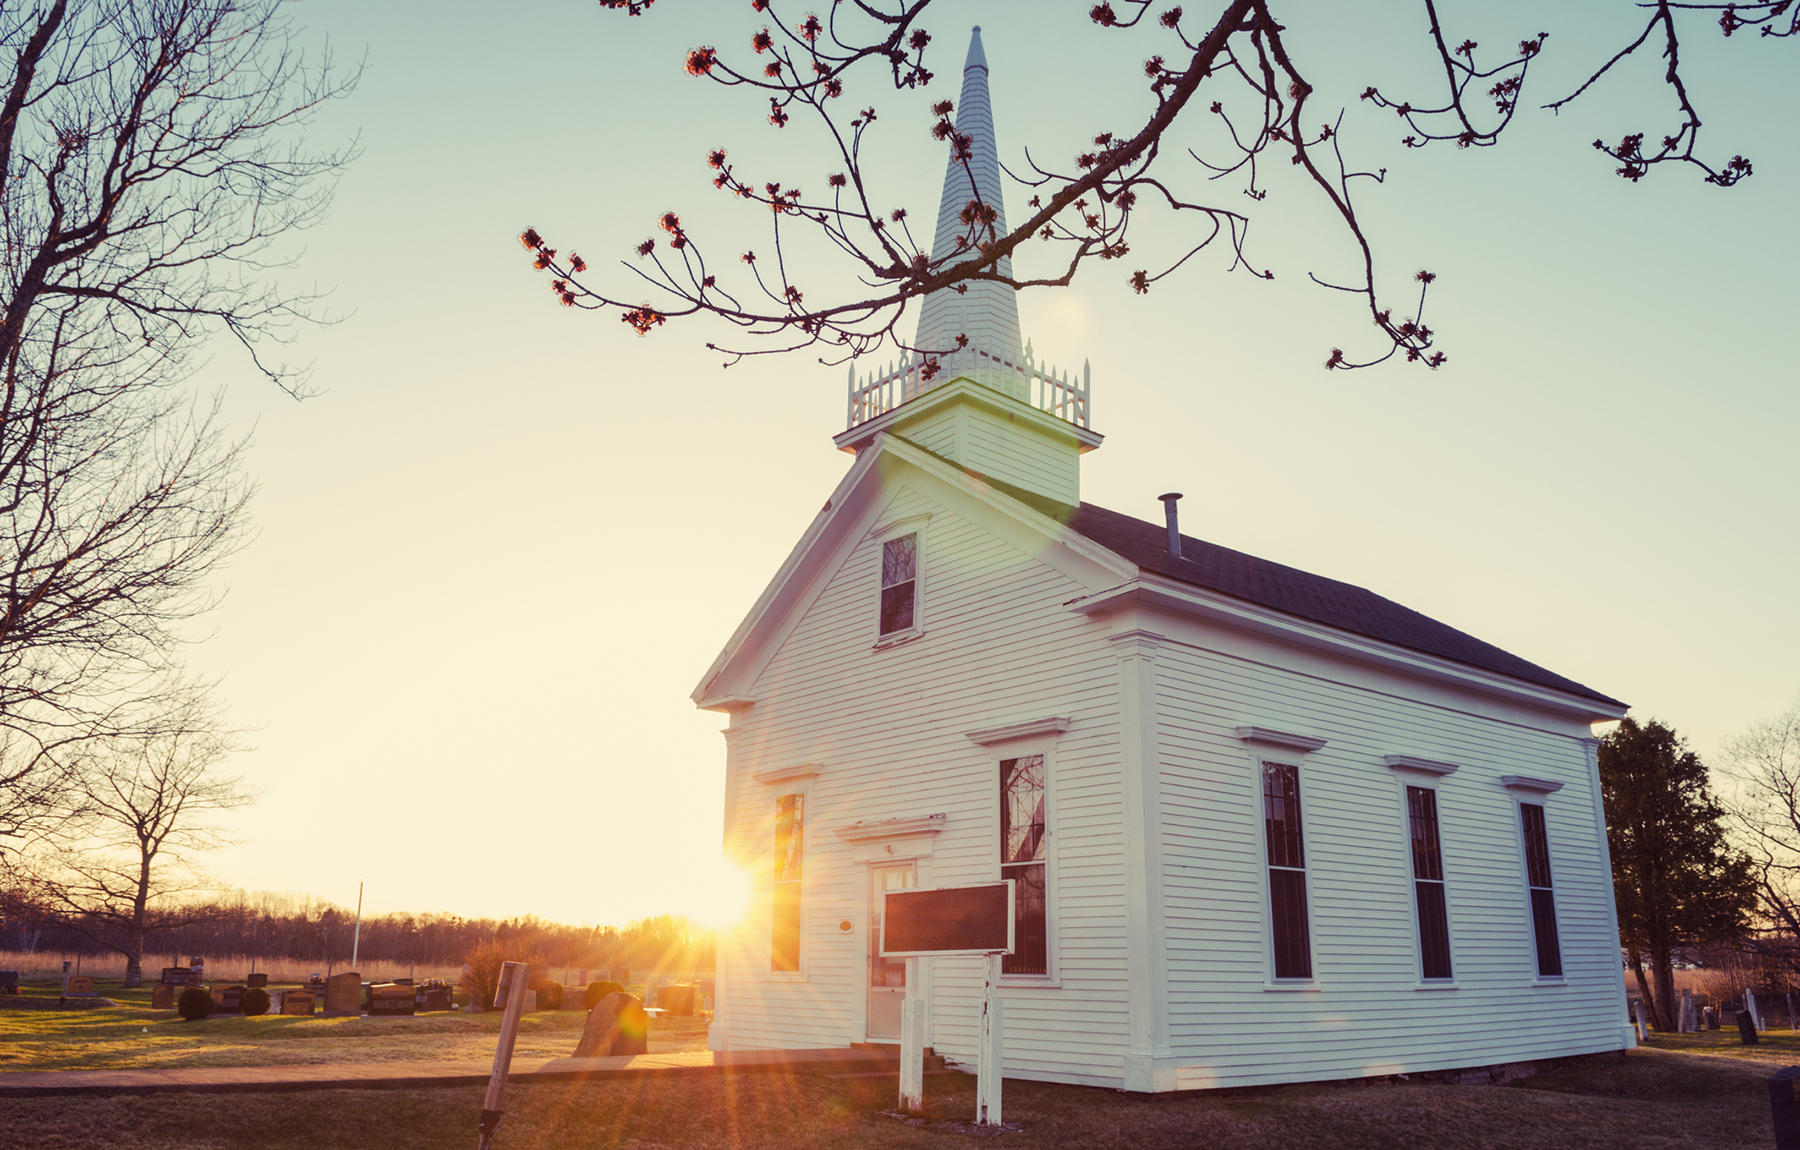 Big or Small, Your Church Matters